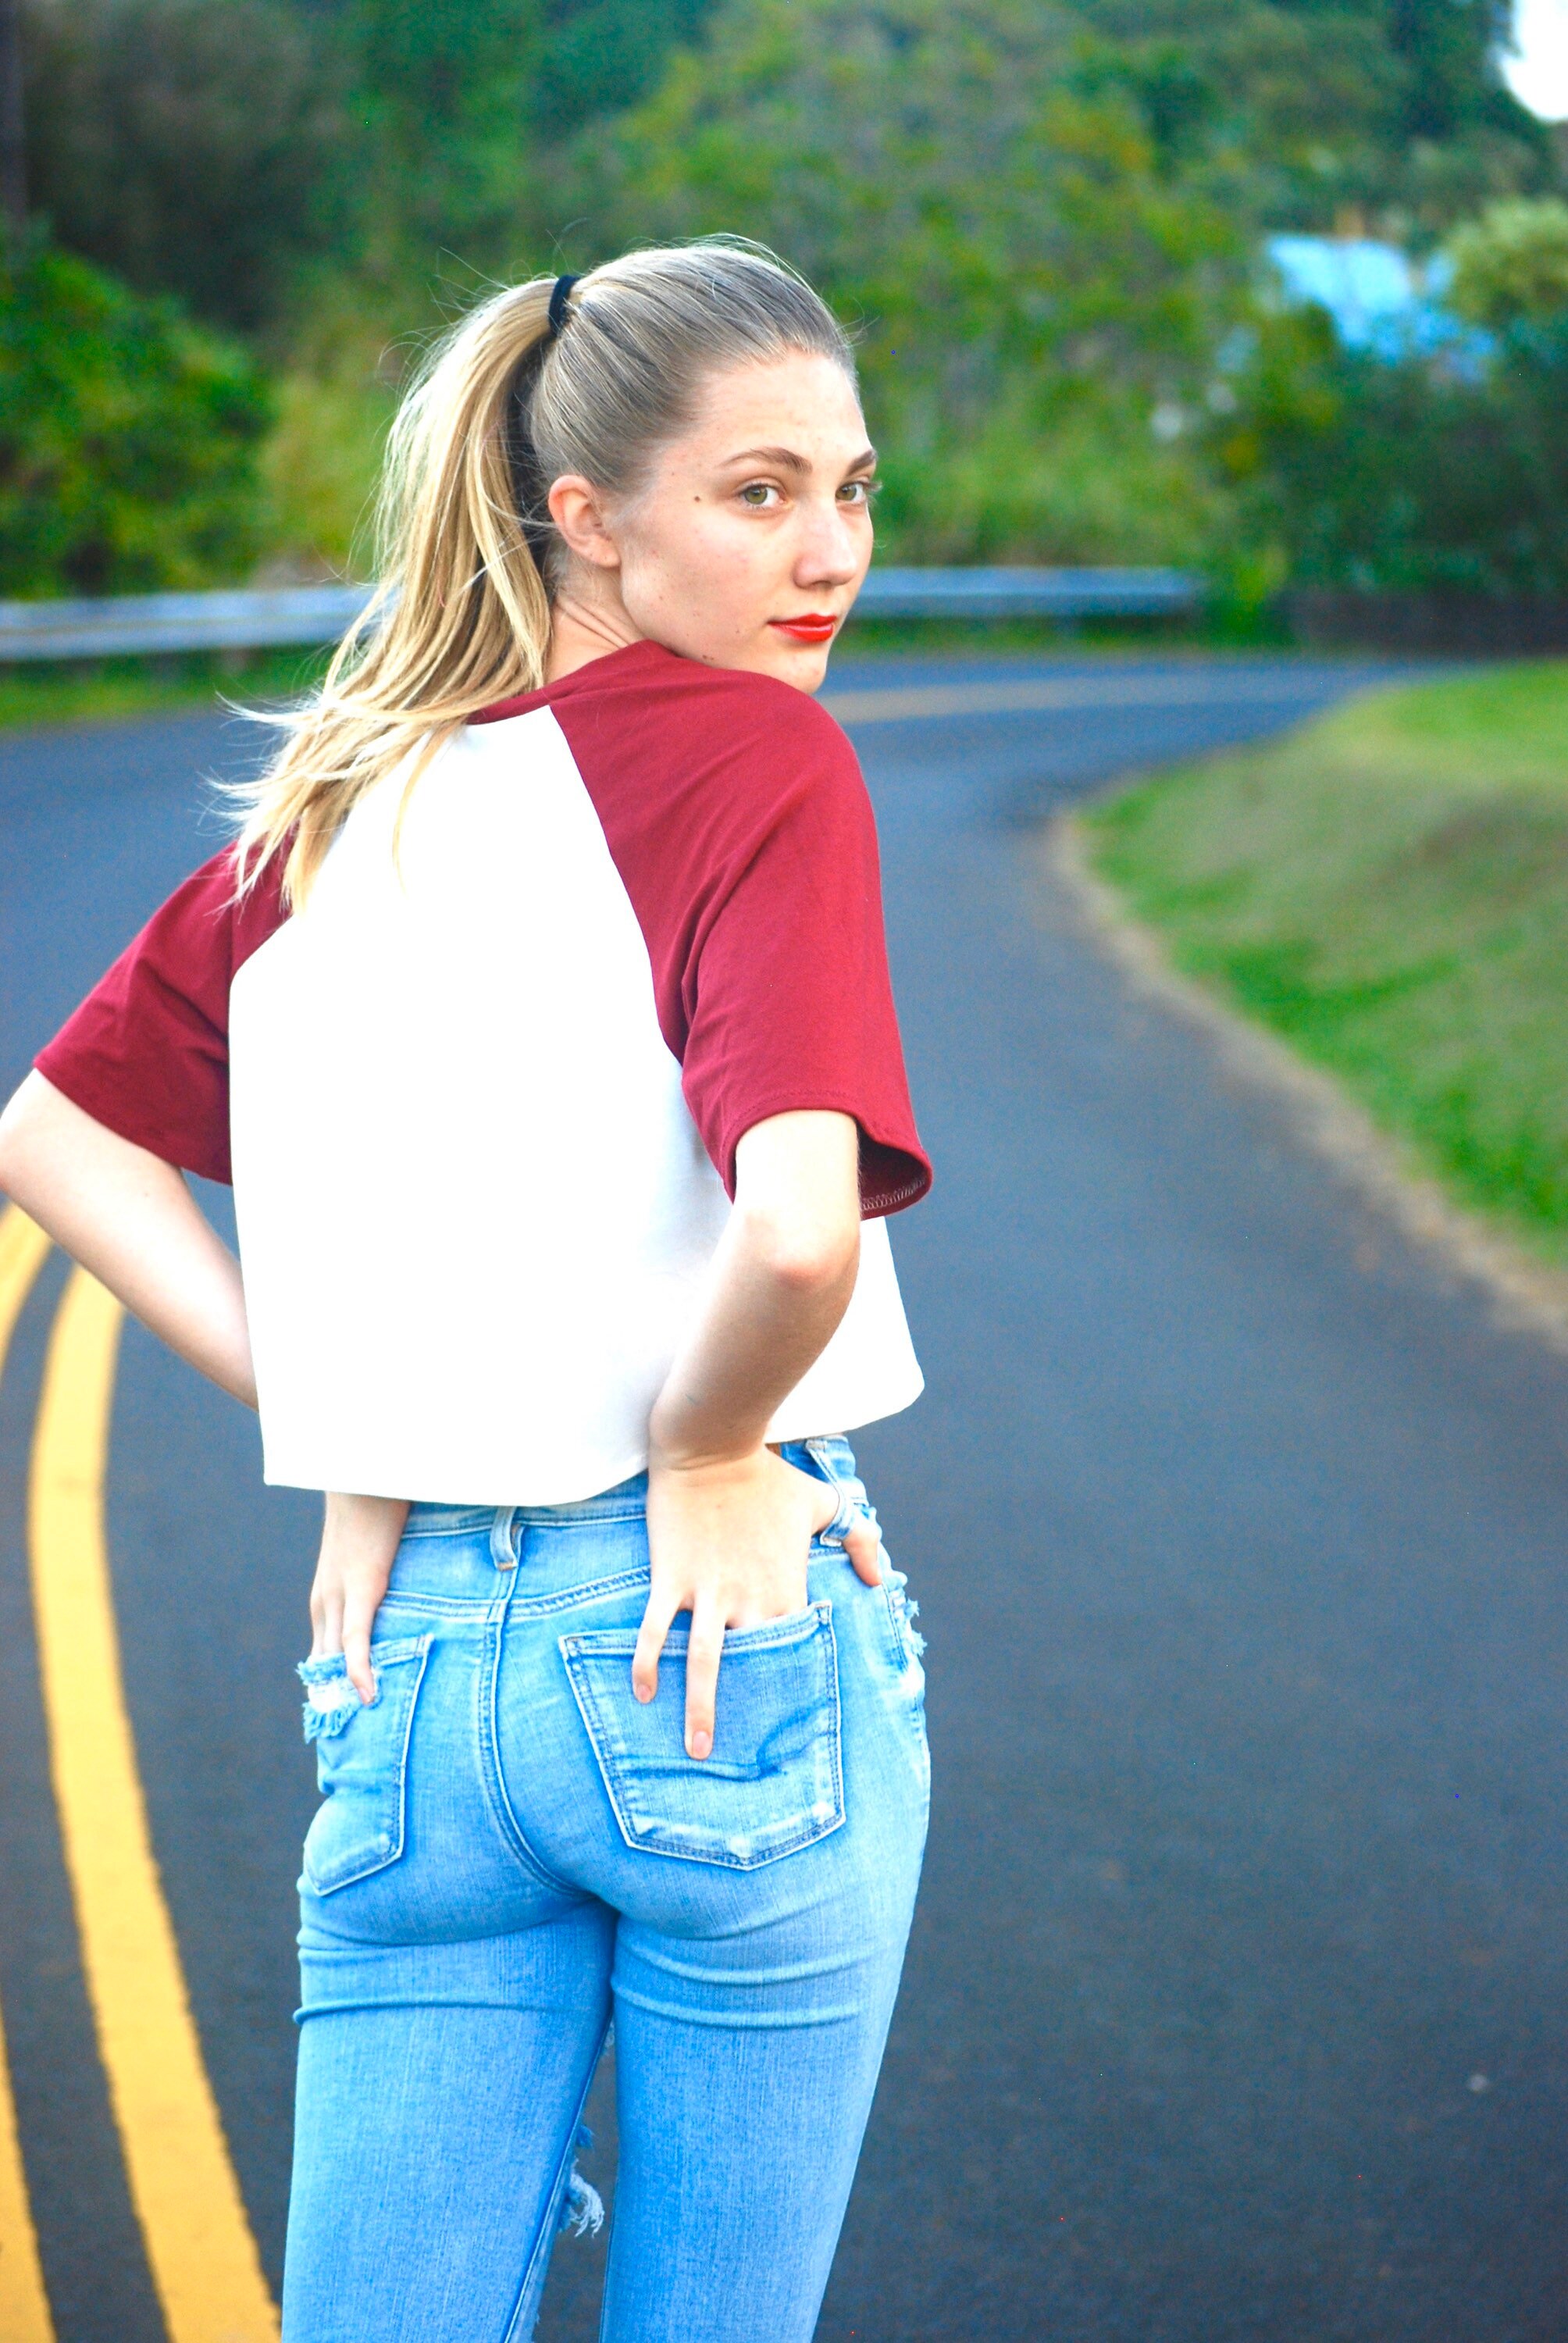 Clothing Available Sleeve Top Red Custom Short Raglan Organic Crop Etsy Sleeve Made - Colors 15 White